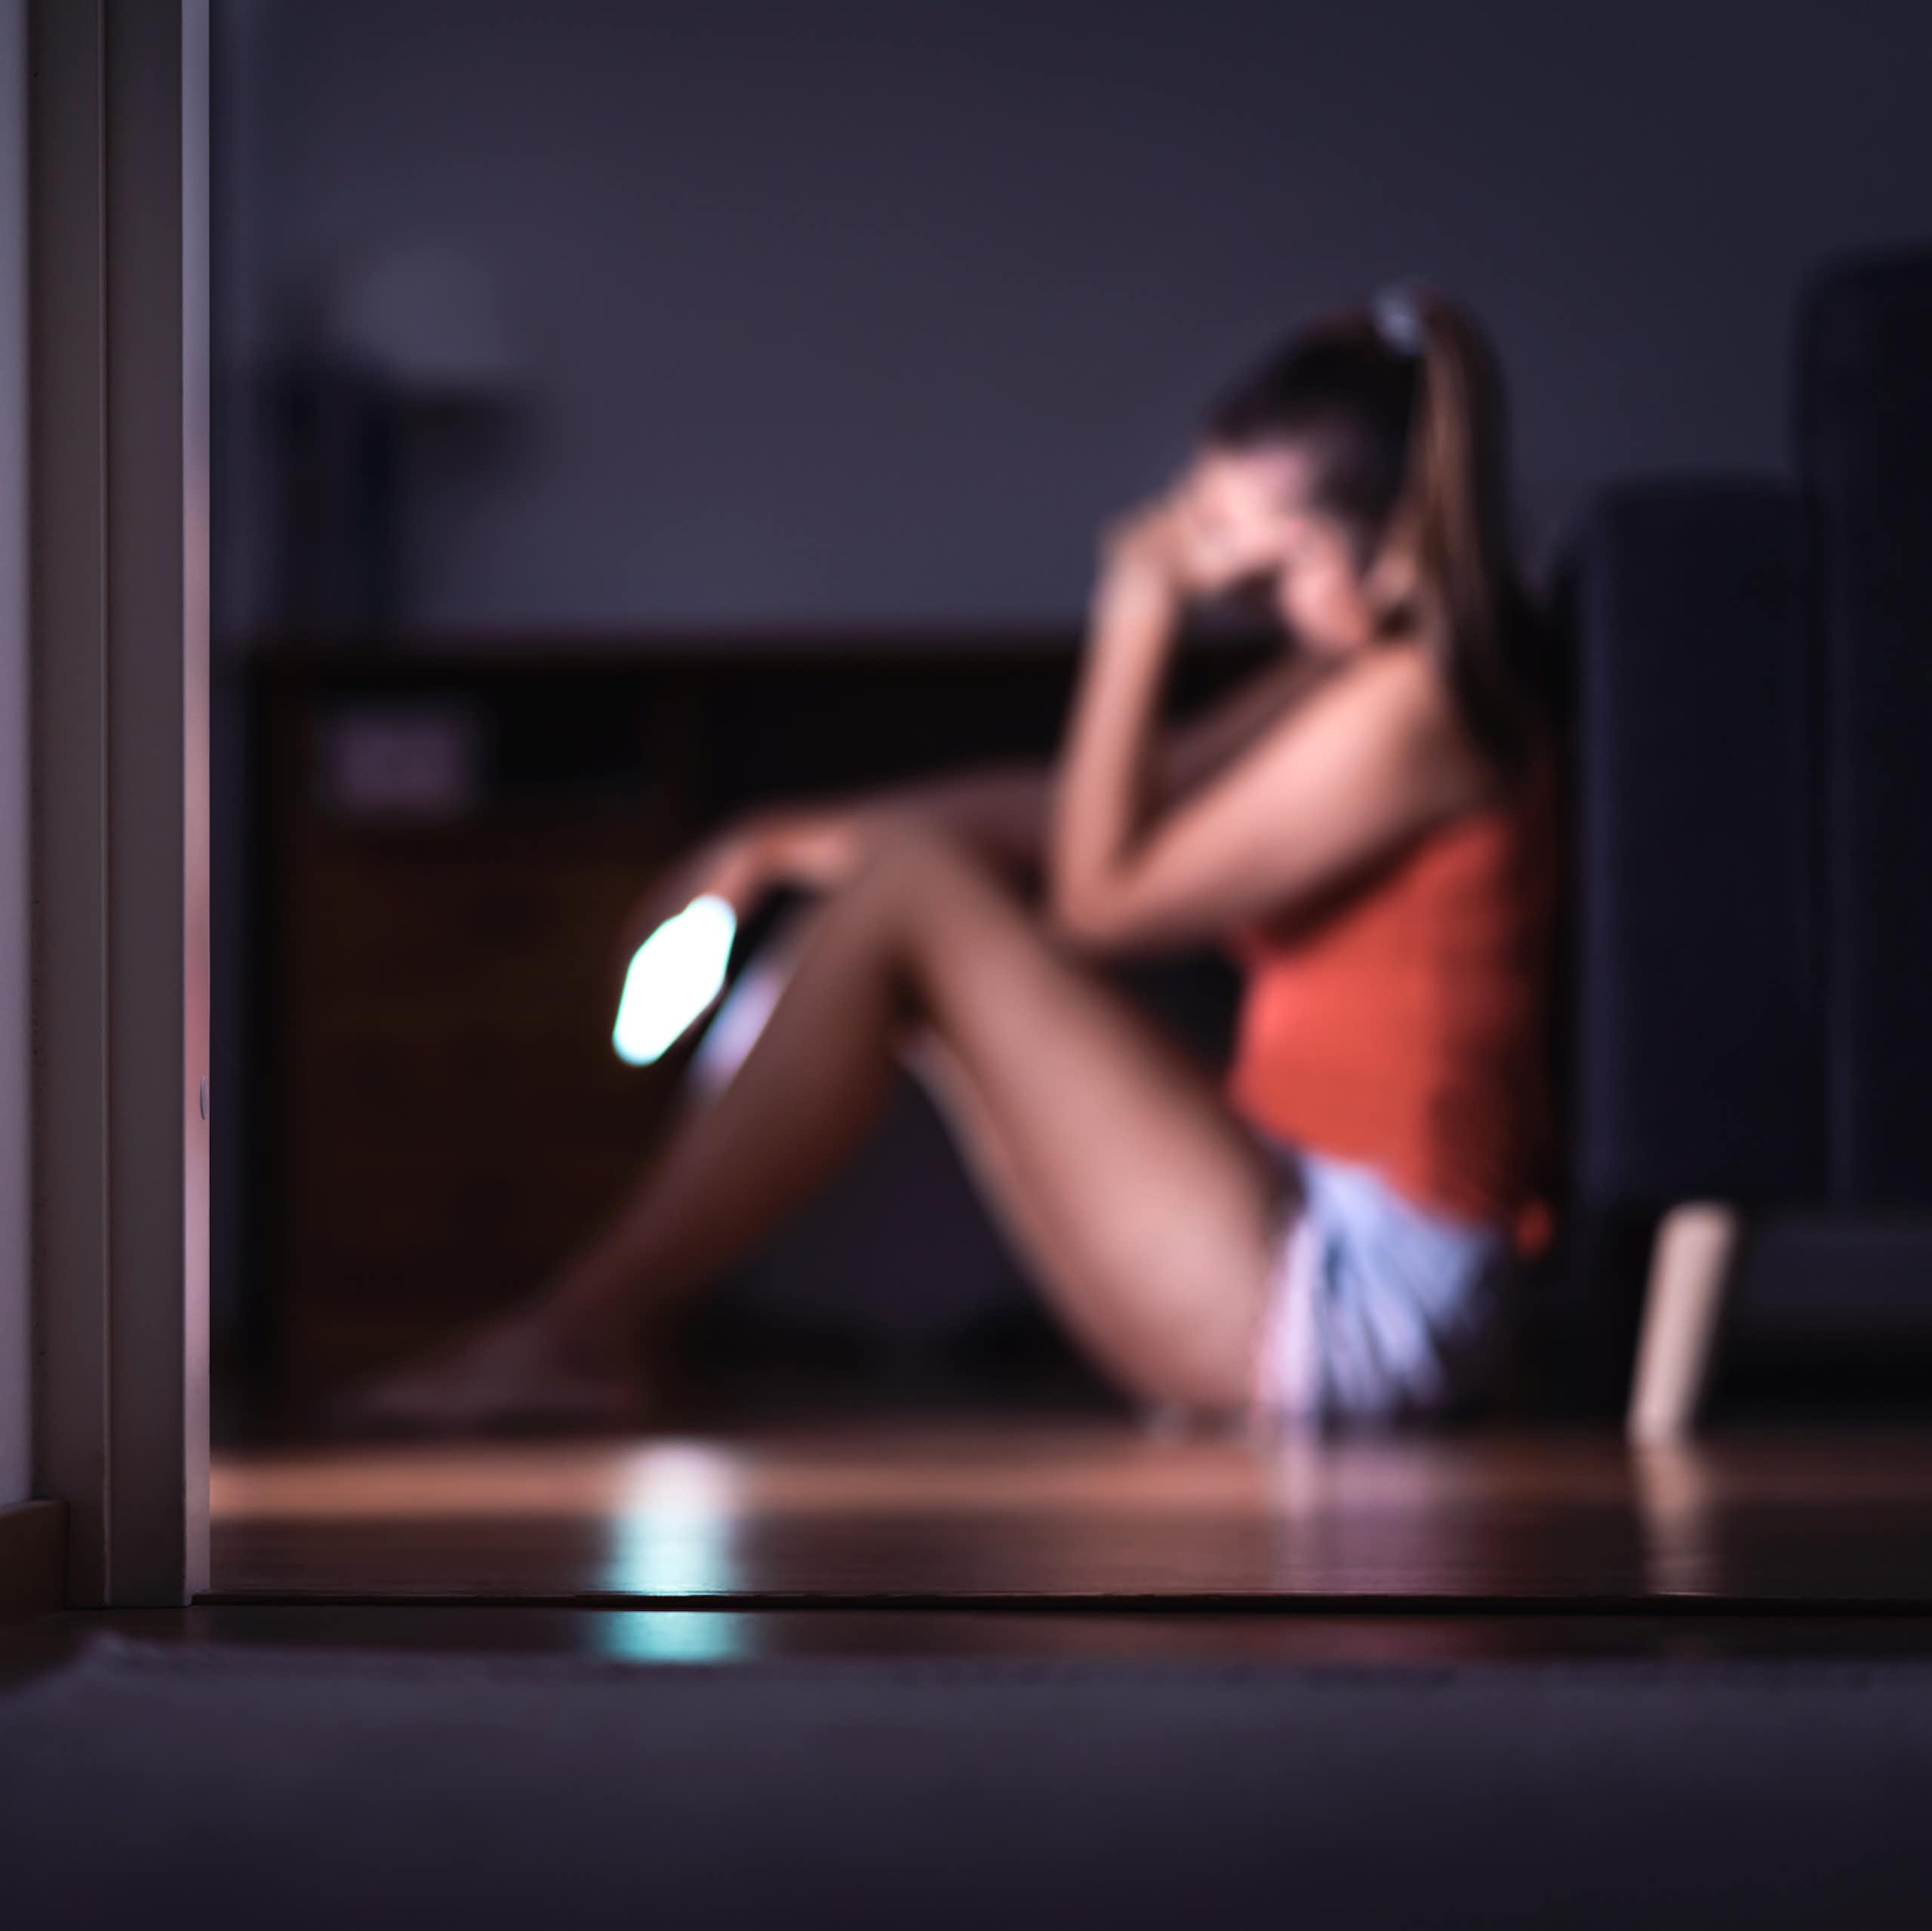 Woman sits on windowsill holding phone and looking worried